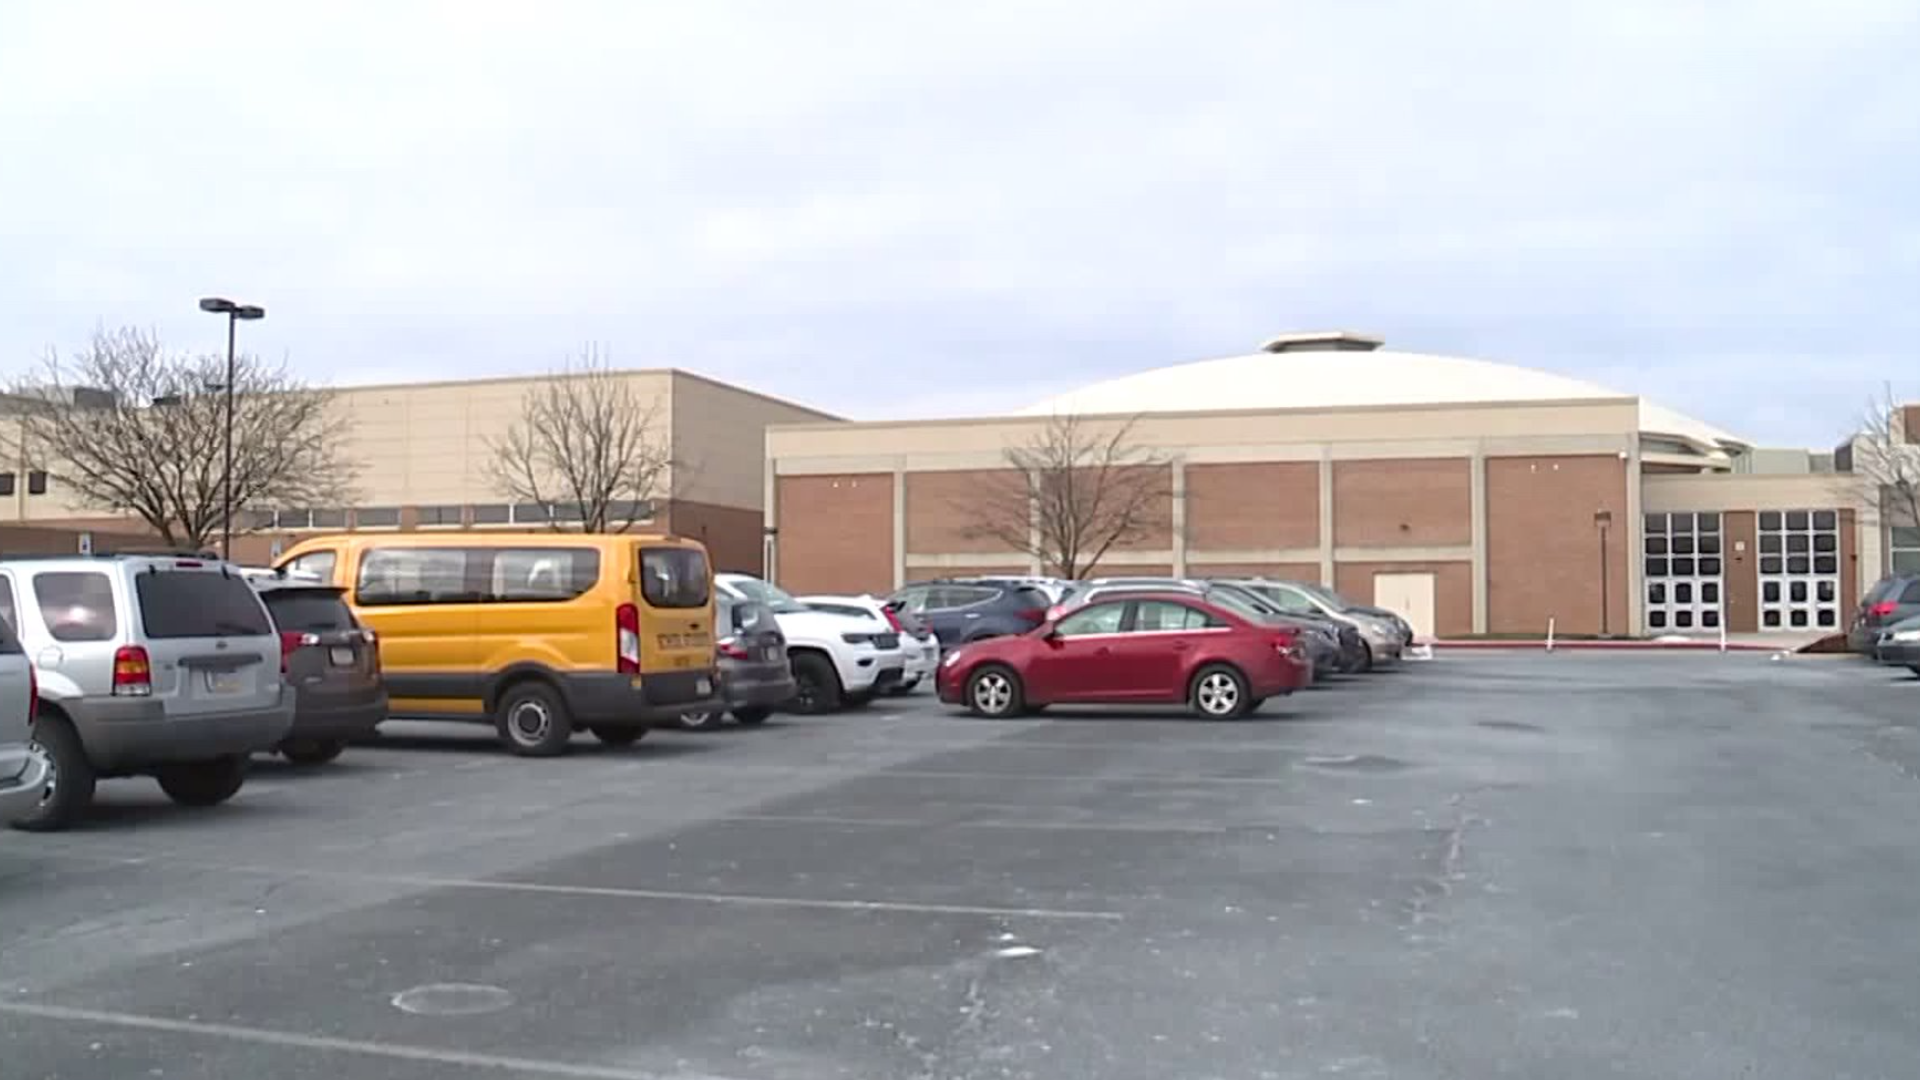 More than 500 students out sick at Cumberland Valley School District